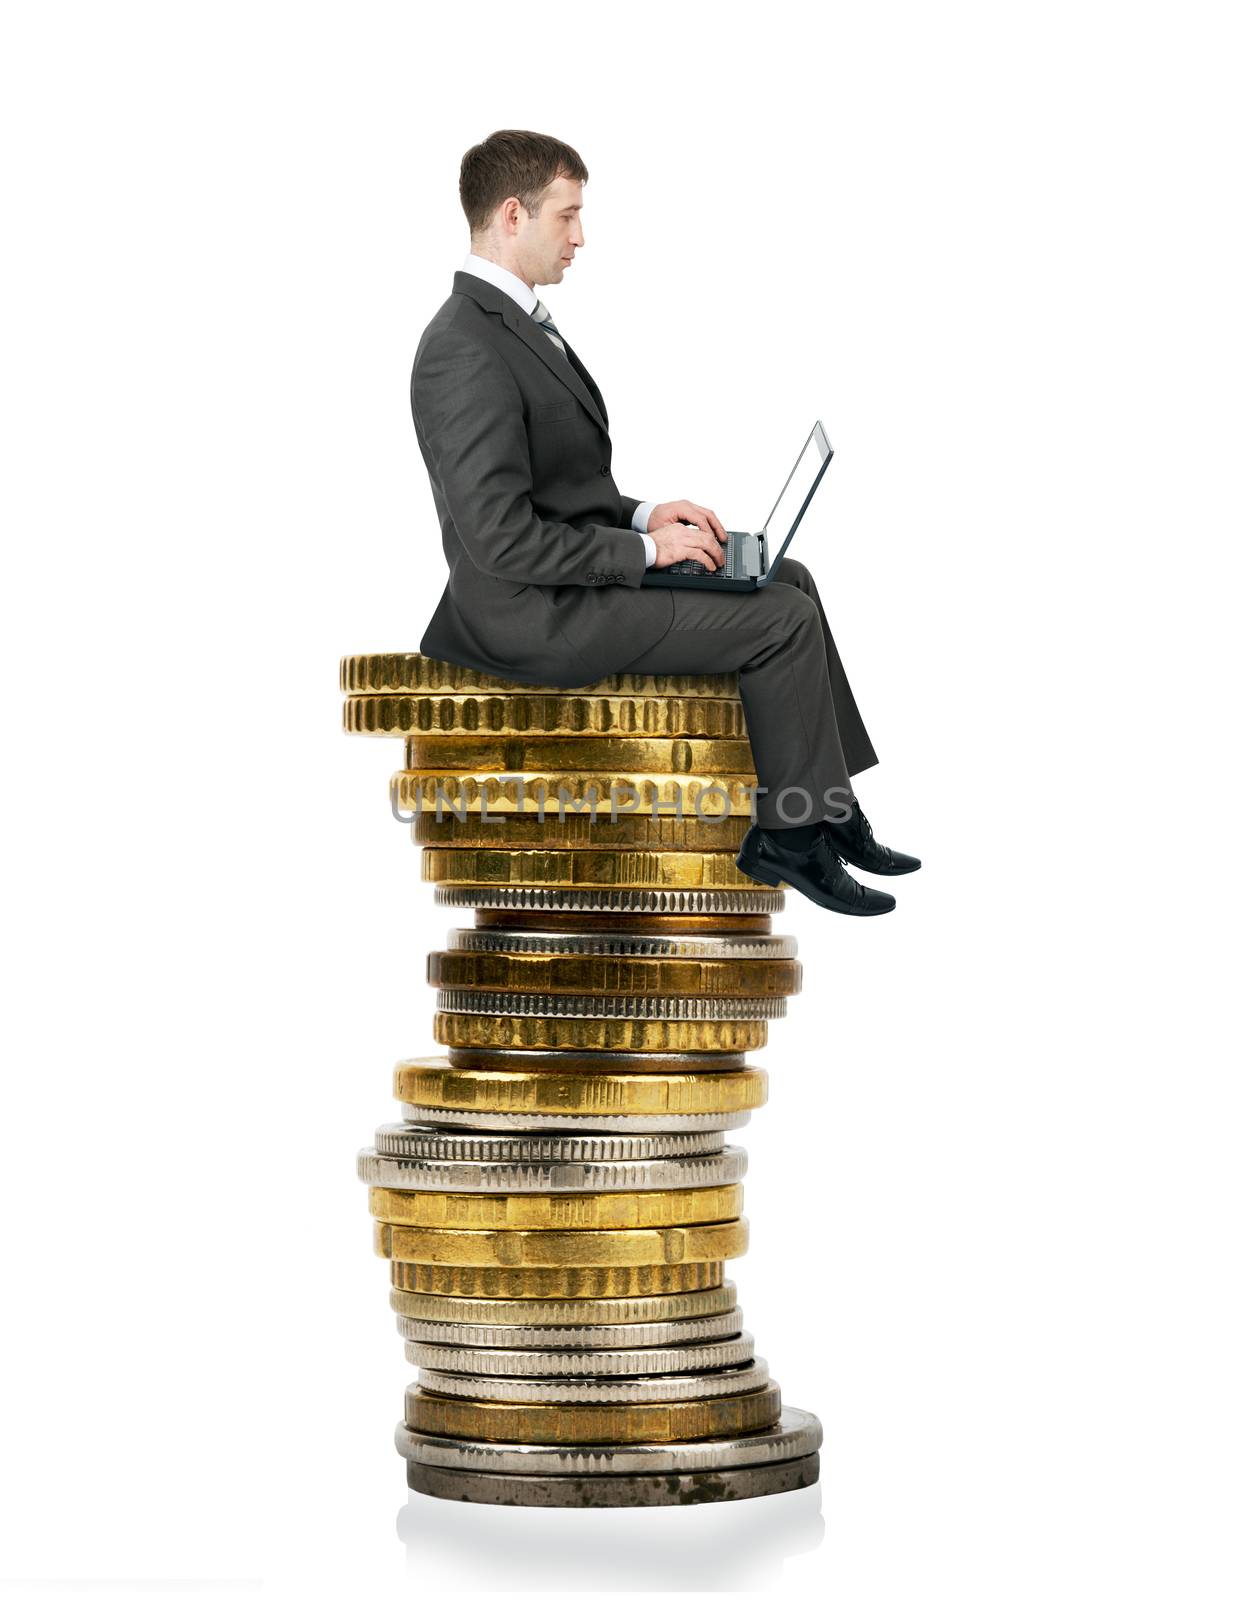 Businessman sitting on  coins isolated on white background